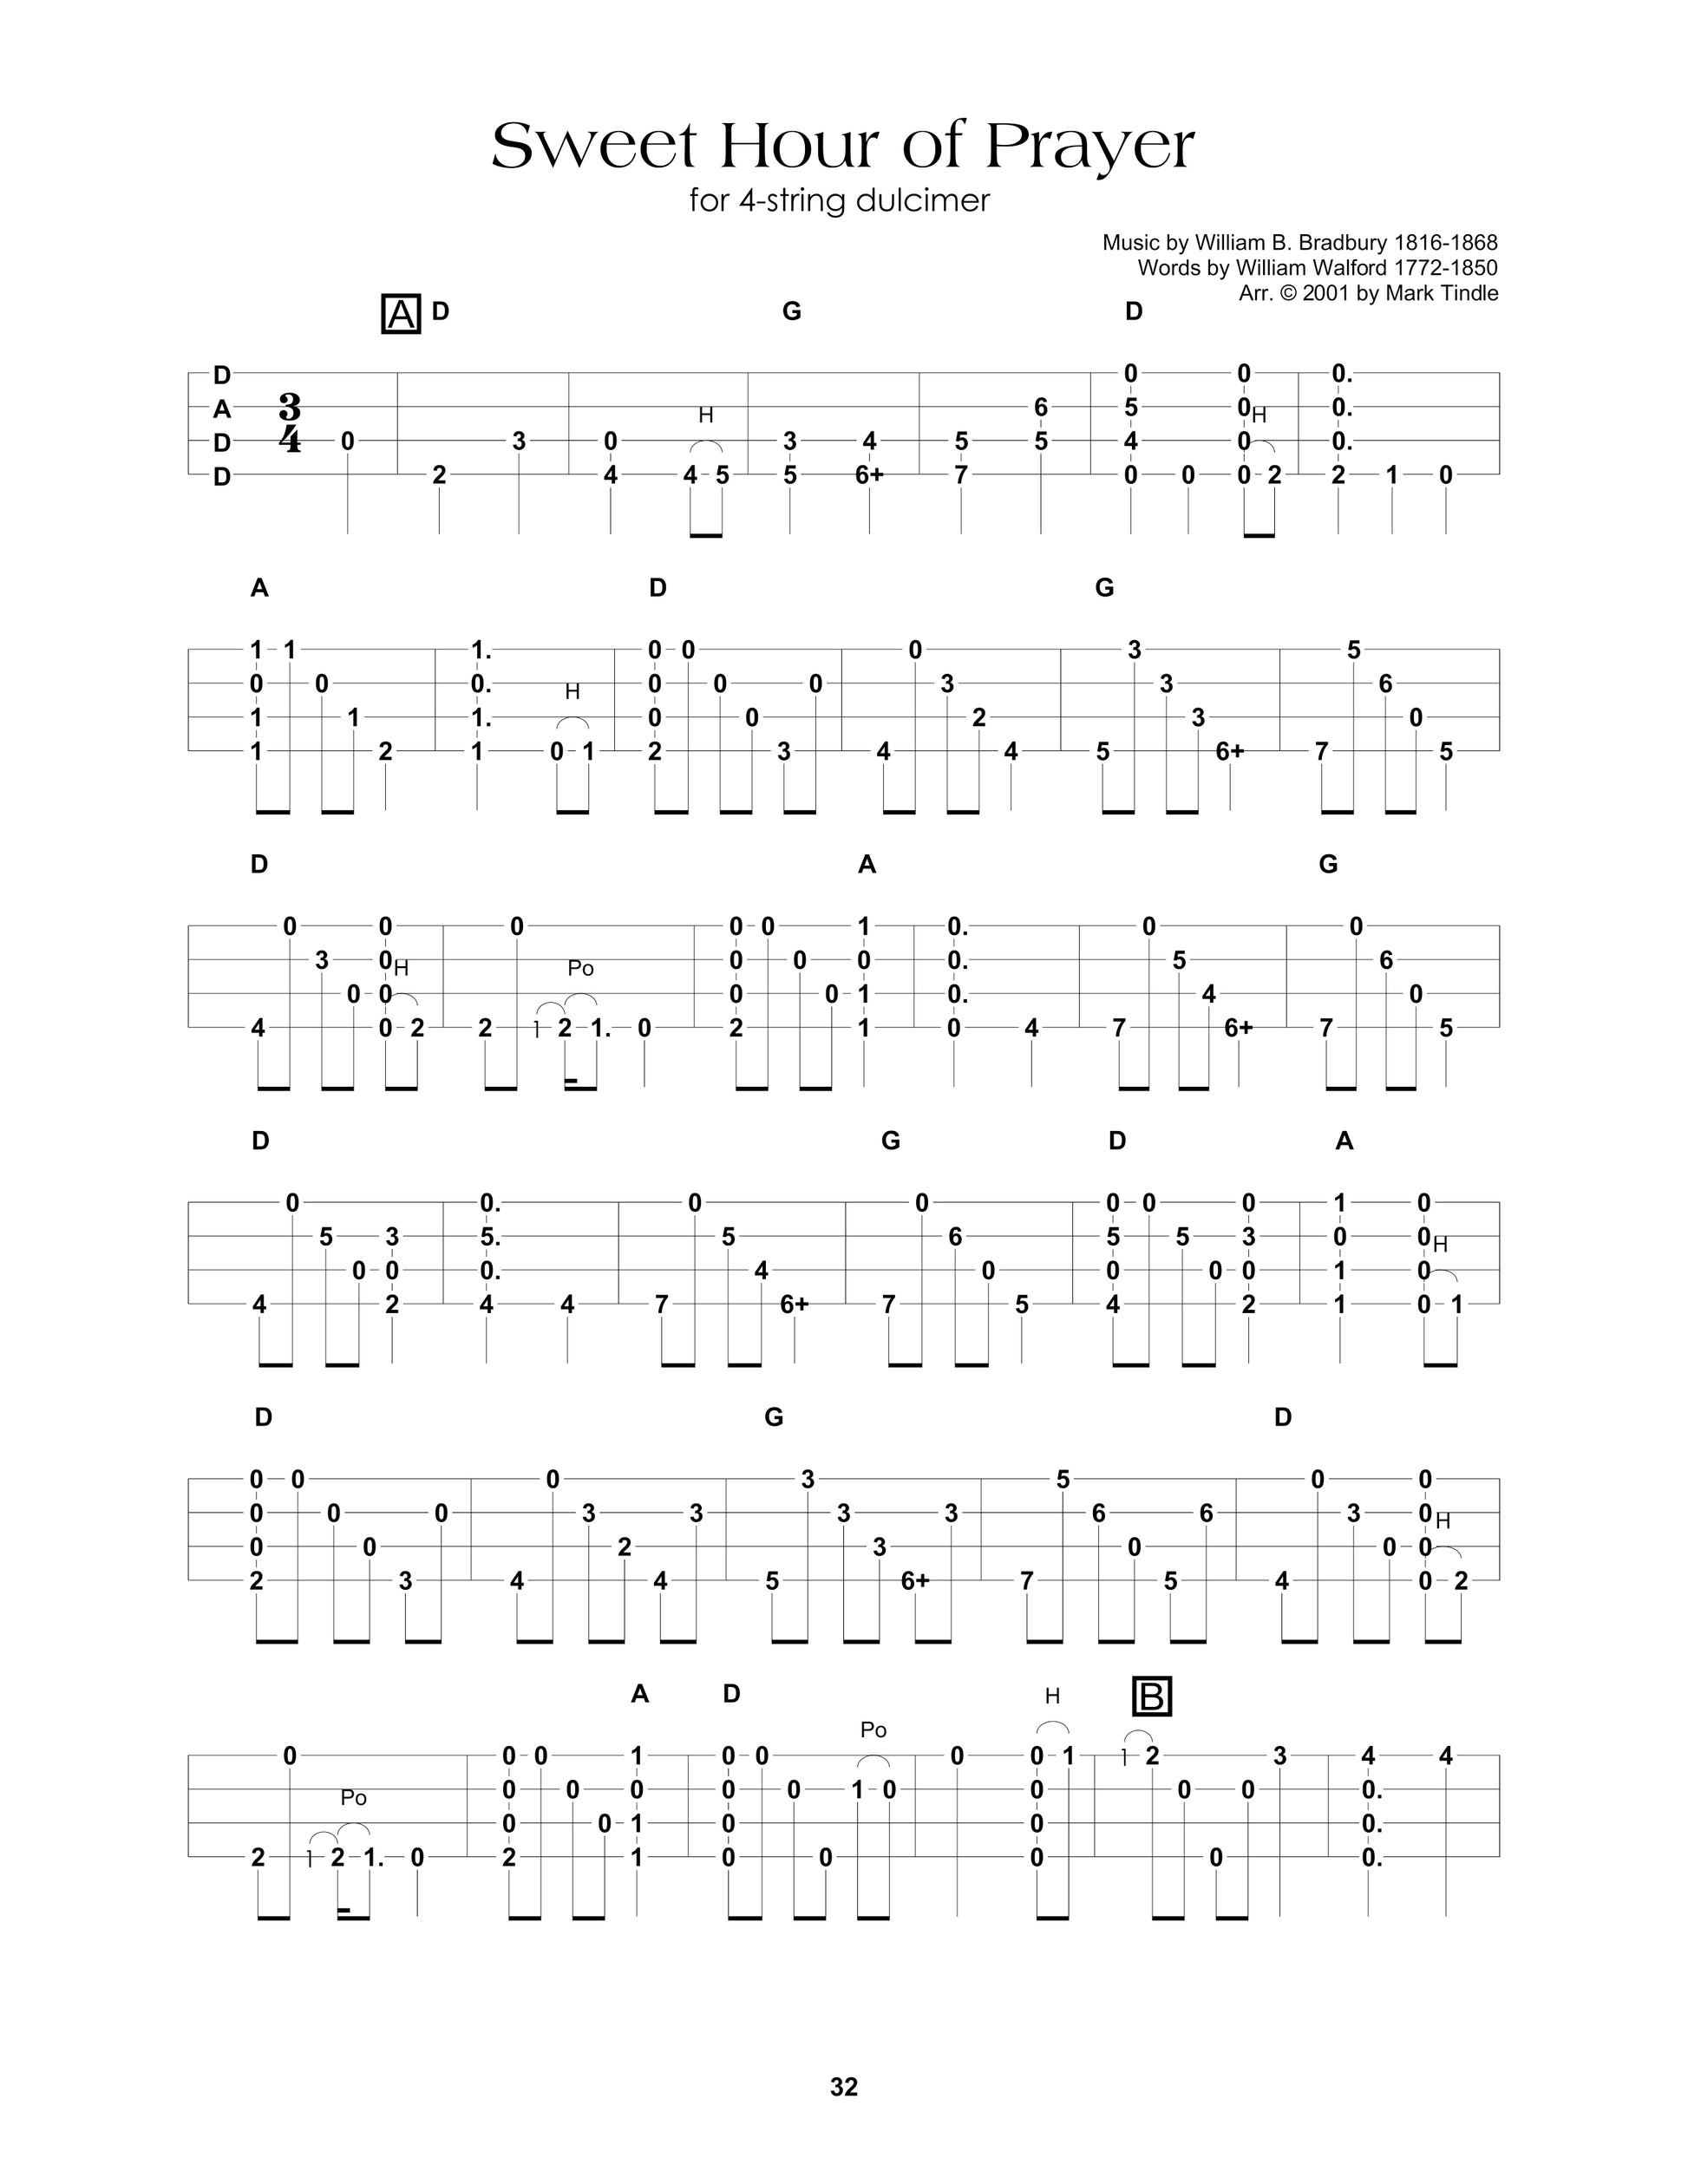 Songbook III, PDF, God The Father